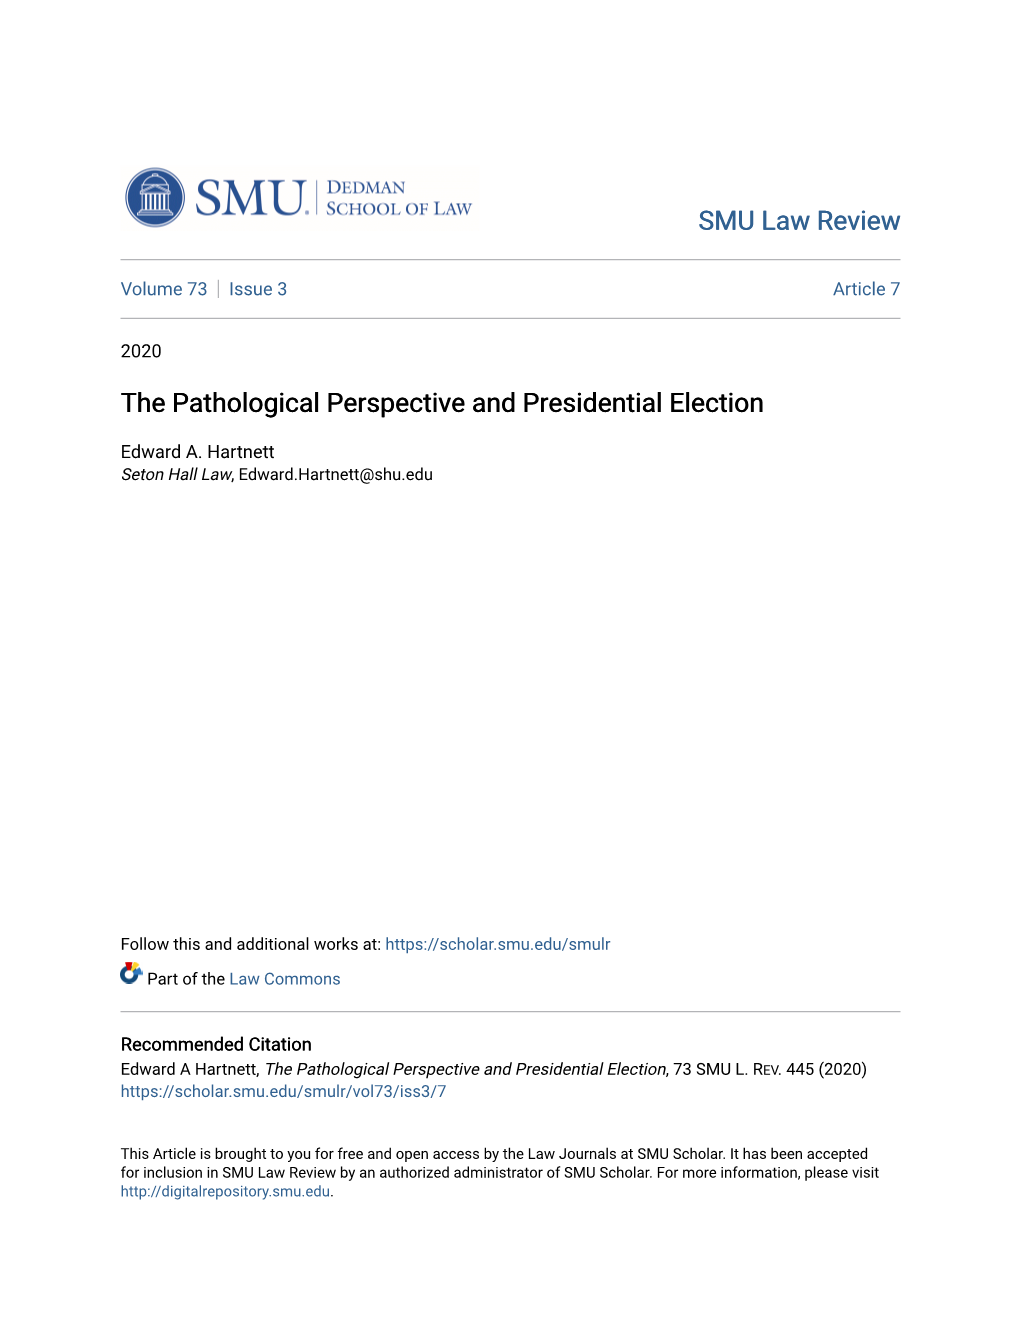 The Pathological Perspective and Presidential Election